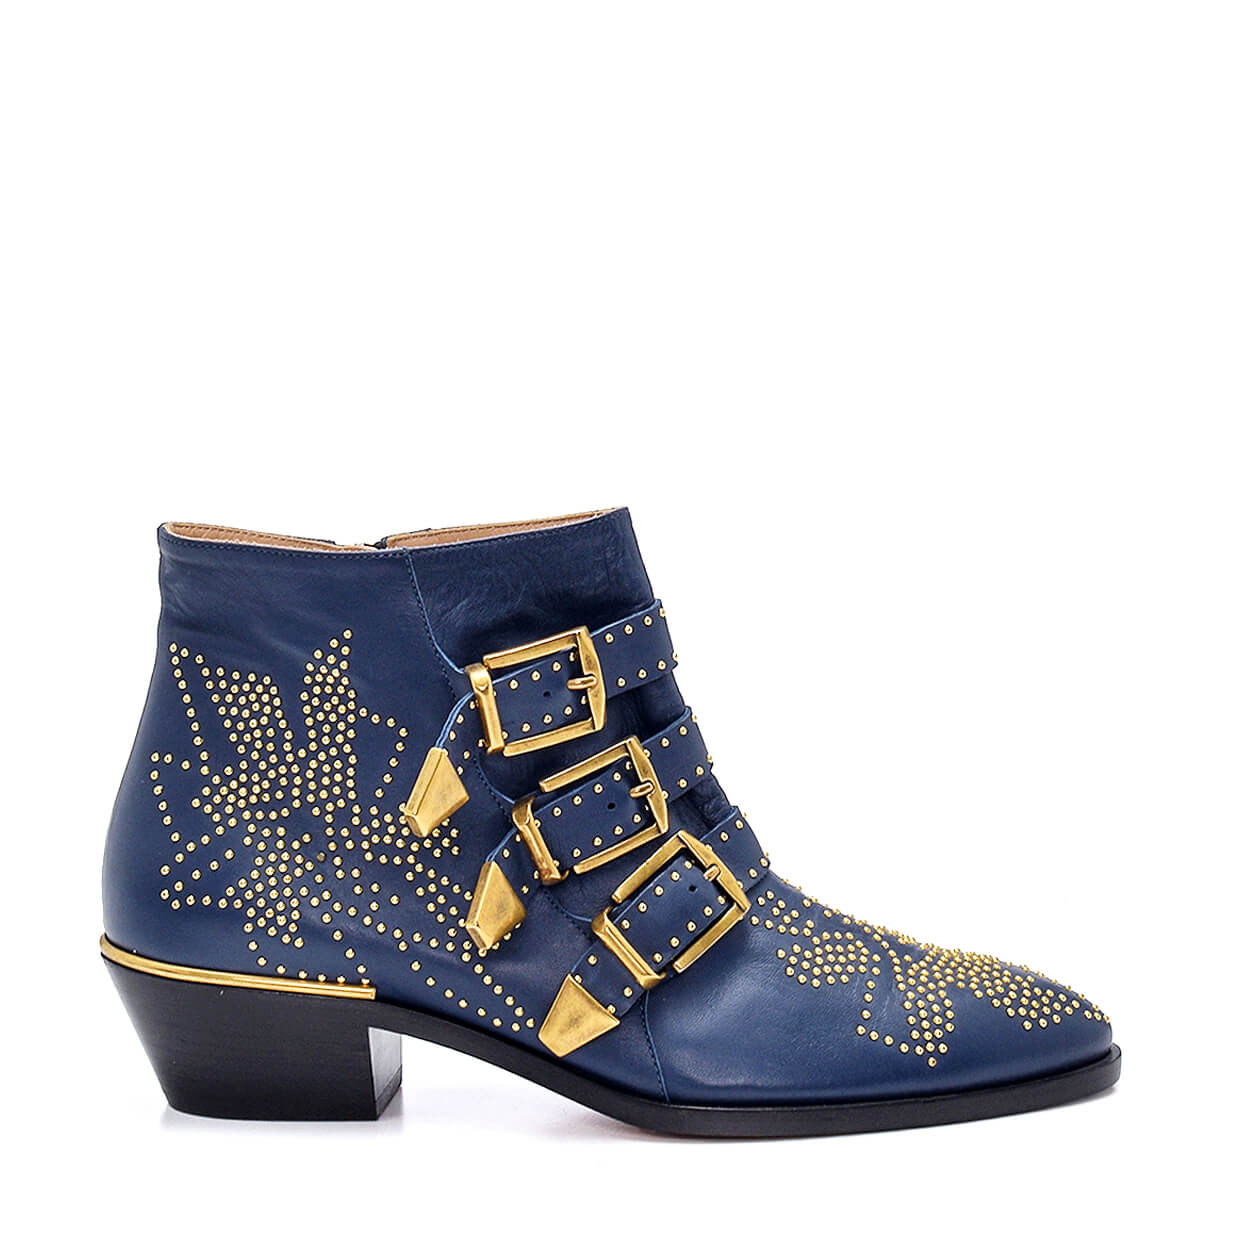 CHLOE - Navy Smooth Nappa Leather Strapped & Studded Susanna Boots